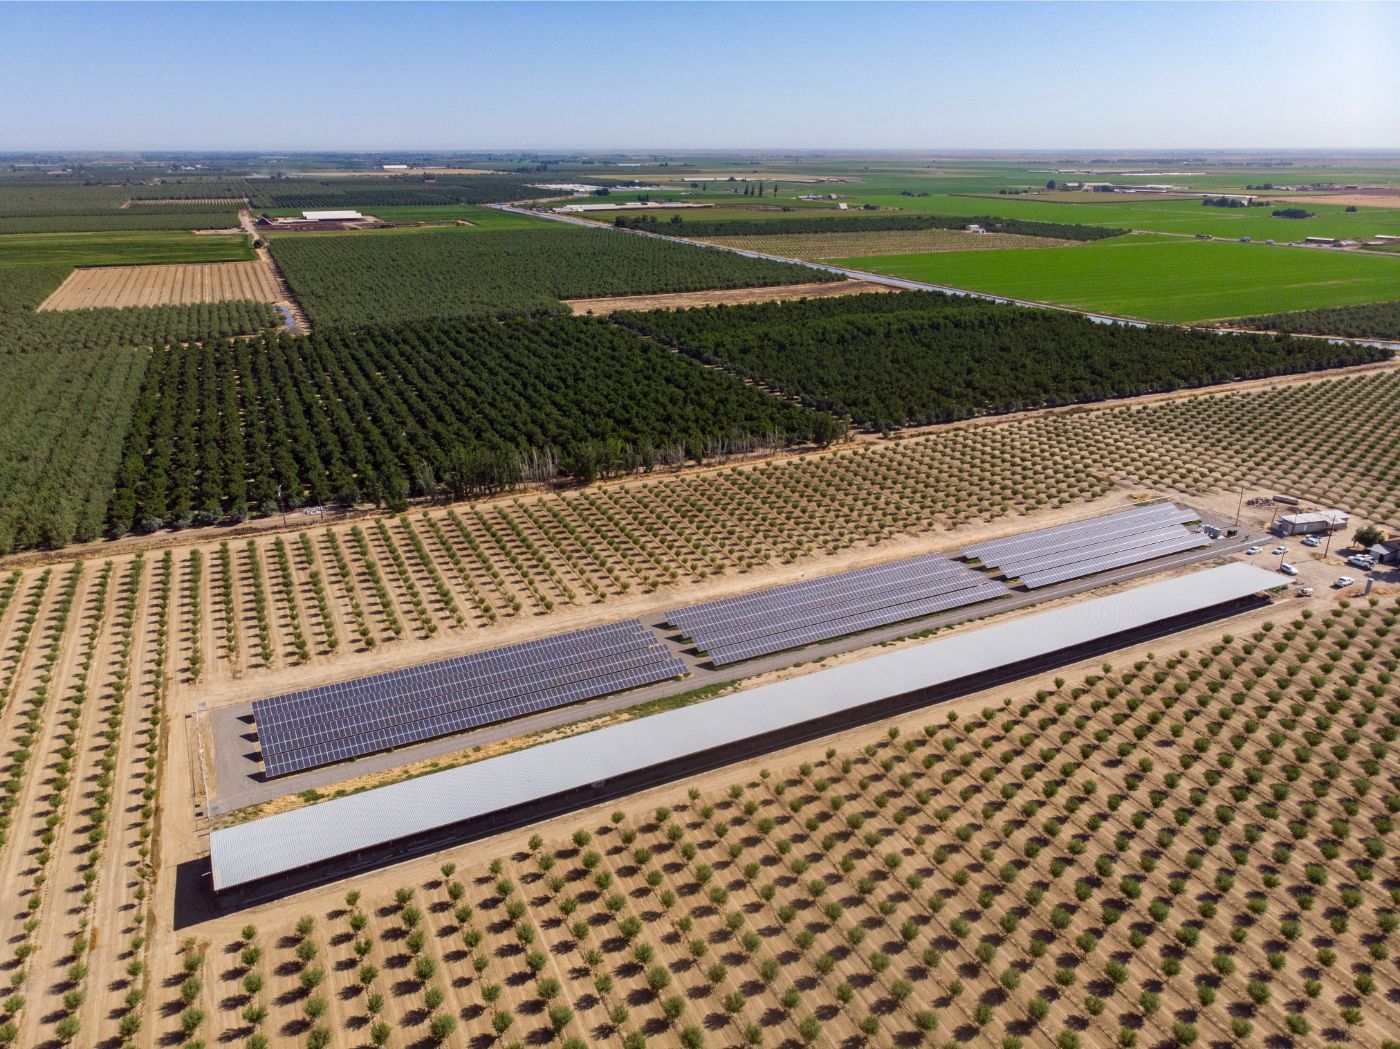 Aerial view of solar farm at Iyer Farms surrounded by planted crops and trees and green farmland in the background.